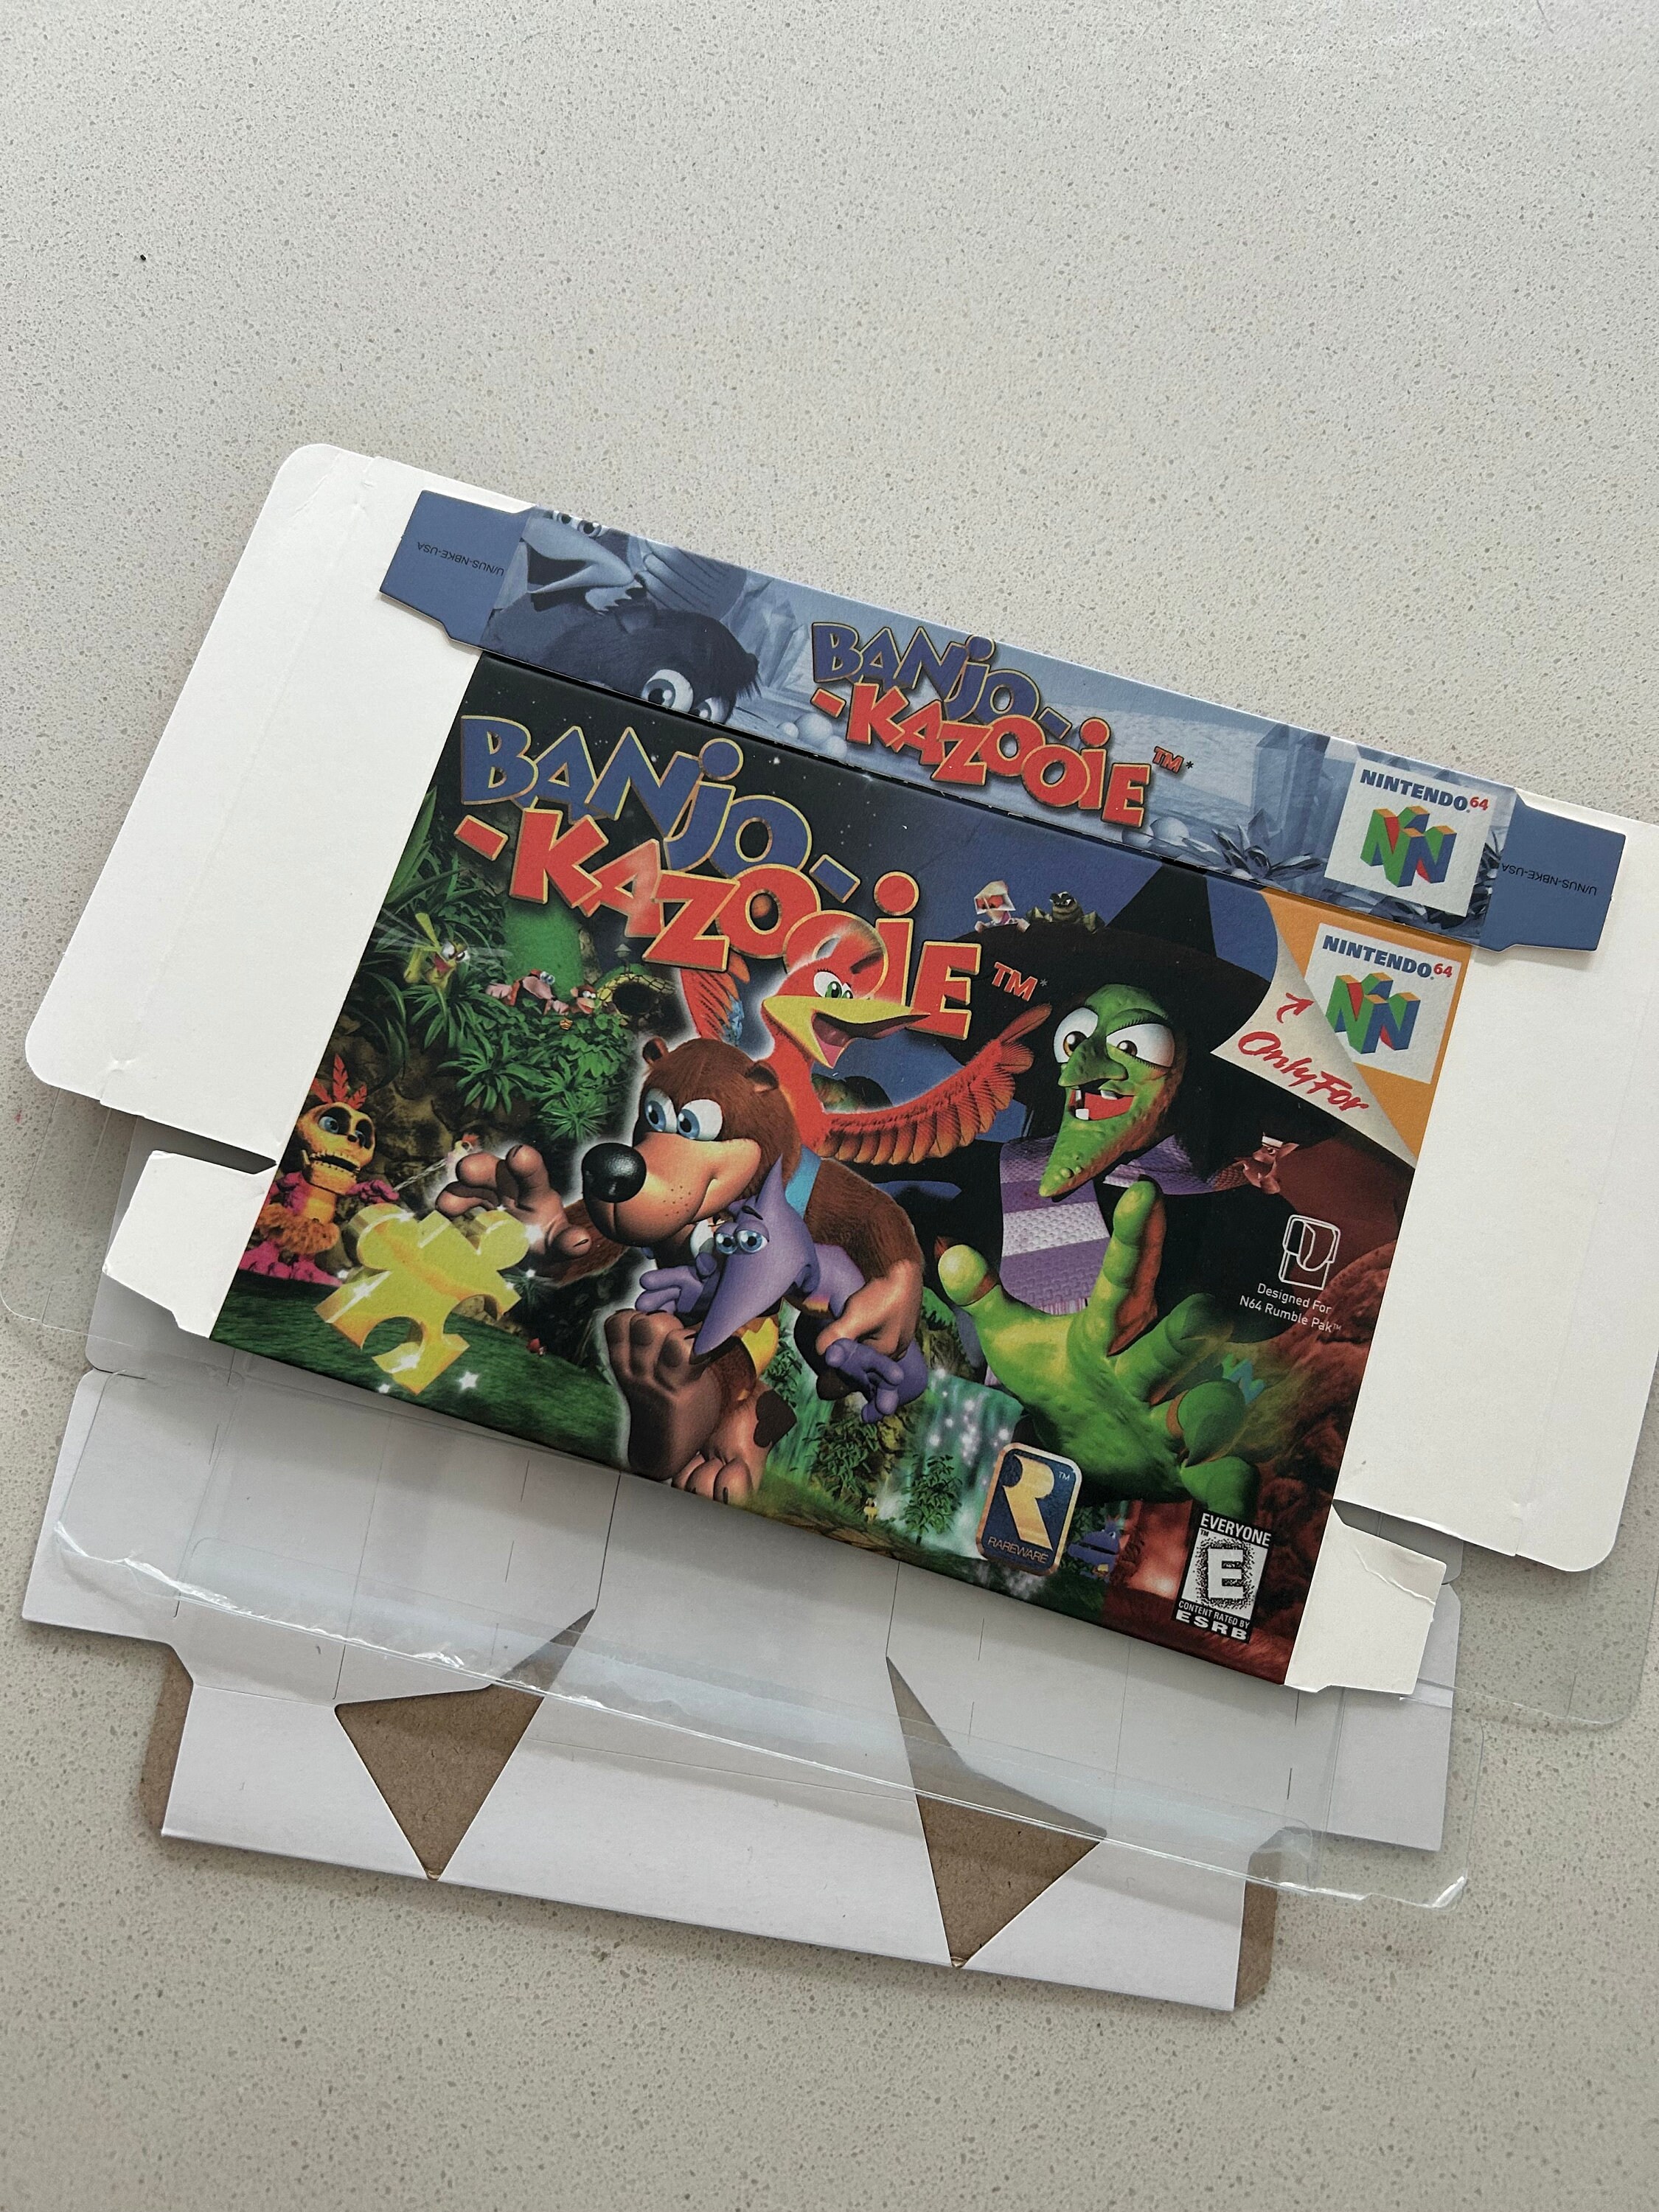 Banjo-Kazooie Tooie: Nintendo 64 (N64) Nintendo Switch Custom  Covers/Physical Game Cases (Boxart) - NO GAME INCL.